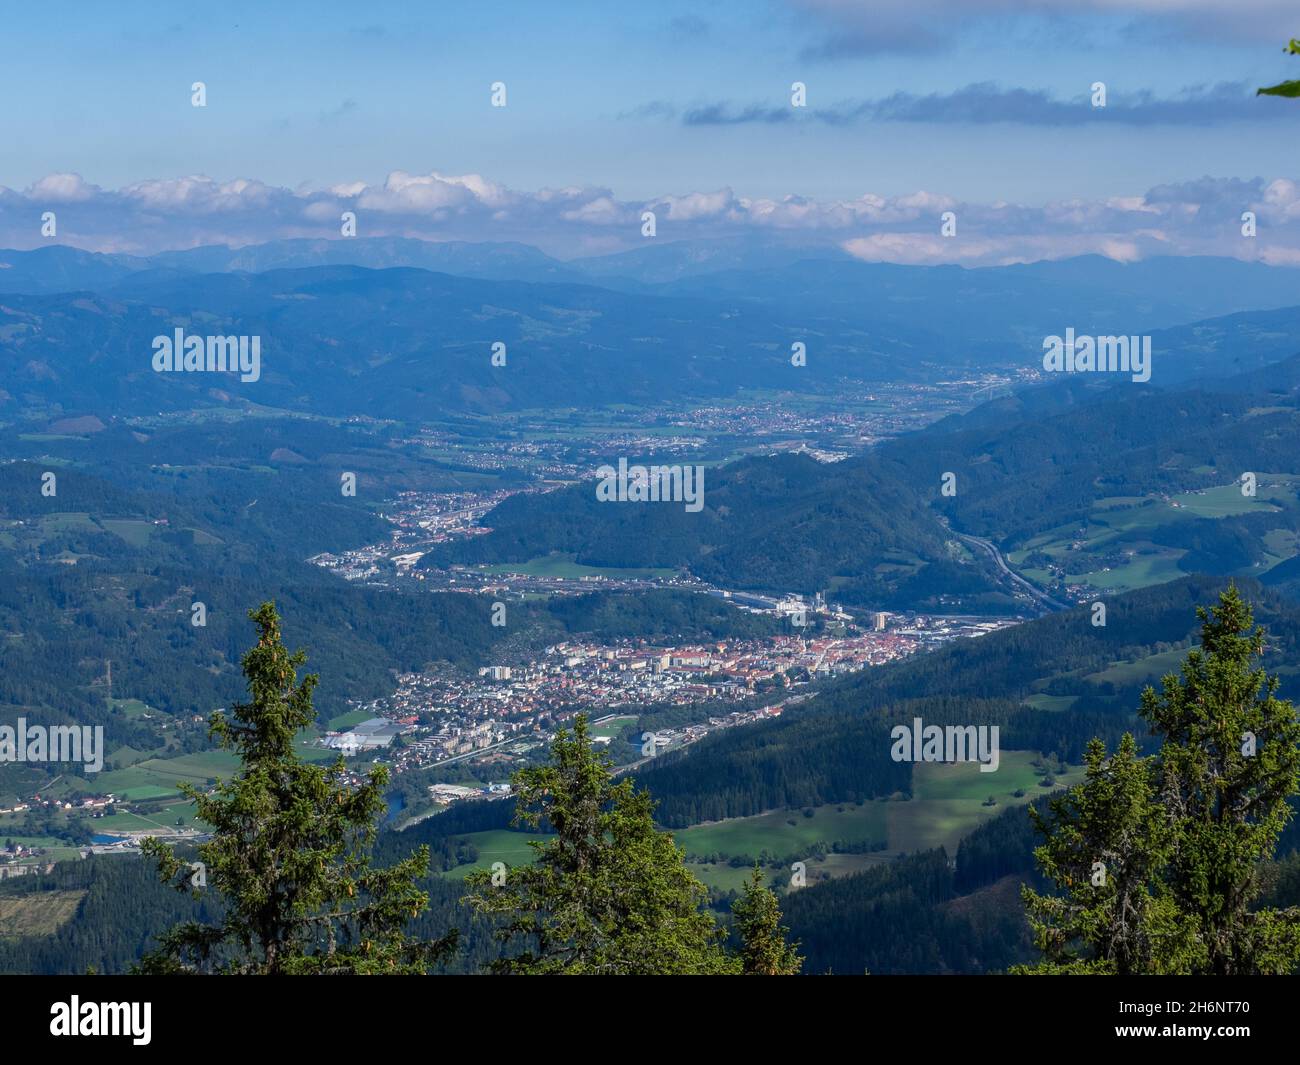 View from the summit of the Mugel over the towns of Bruck/Mur, Kapfenberg and the Muerz Valley, Mugel, Styria, Austria Stock Photo